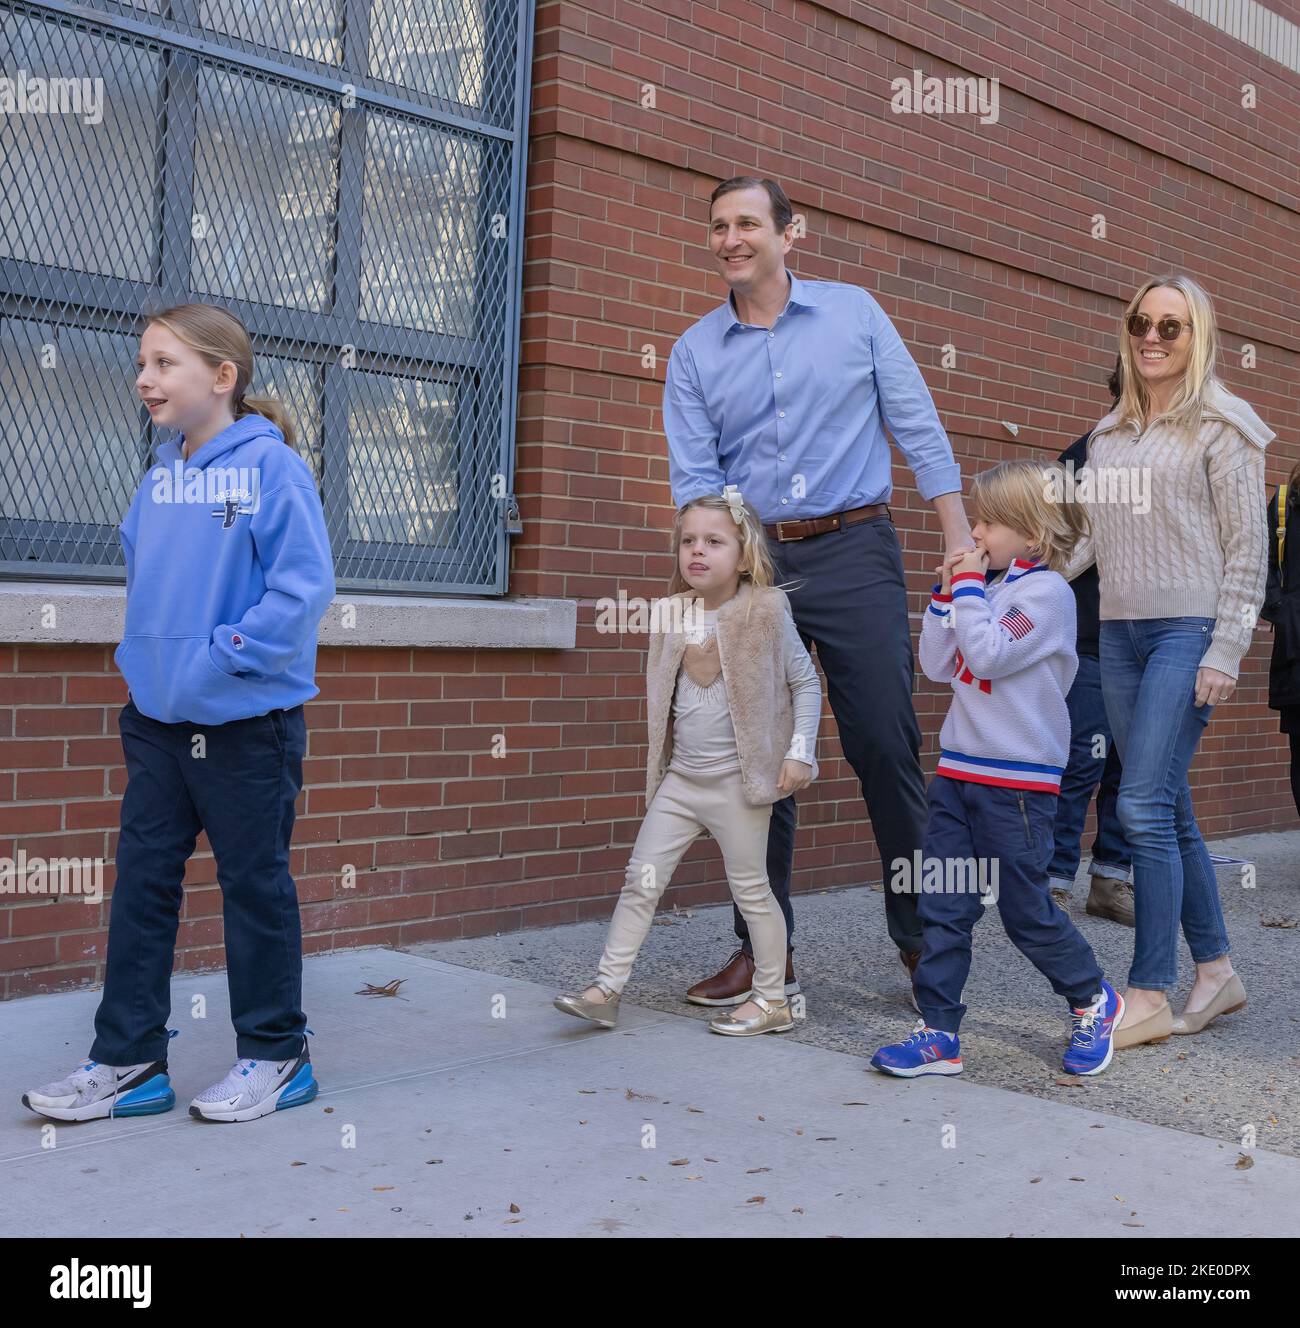 NEW YORK, N.Y. – November 8, 2022: Congressional candidate Dan Goldman waits to vote with his wife Corinne Levy and their children. Stock Photo